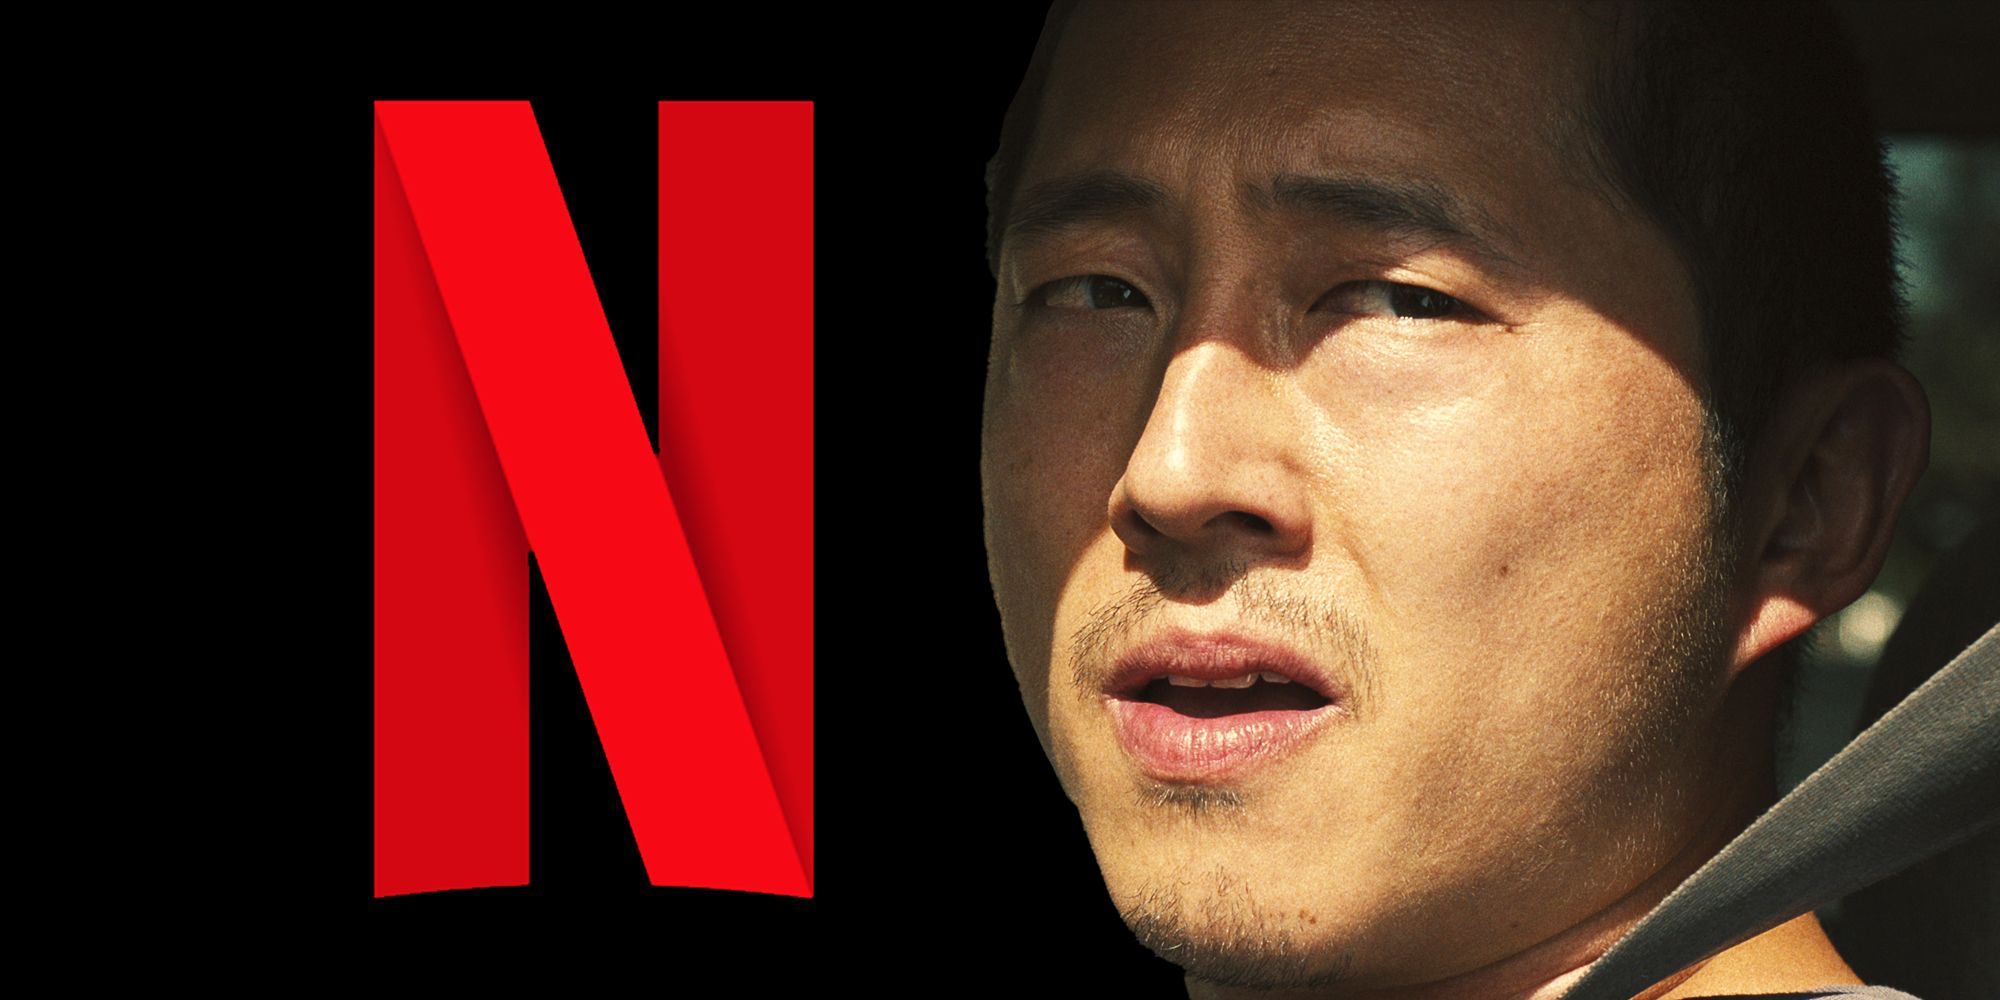 Steven Yeun in Beef and the Netflix logo